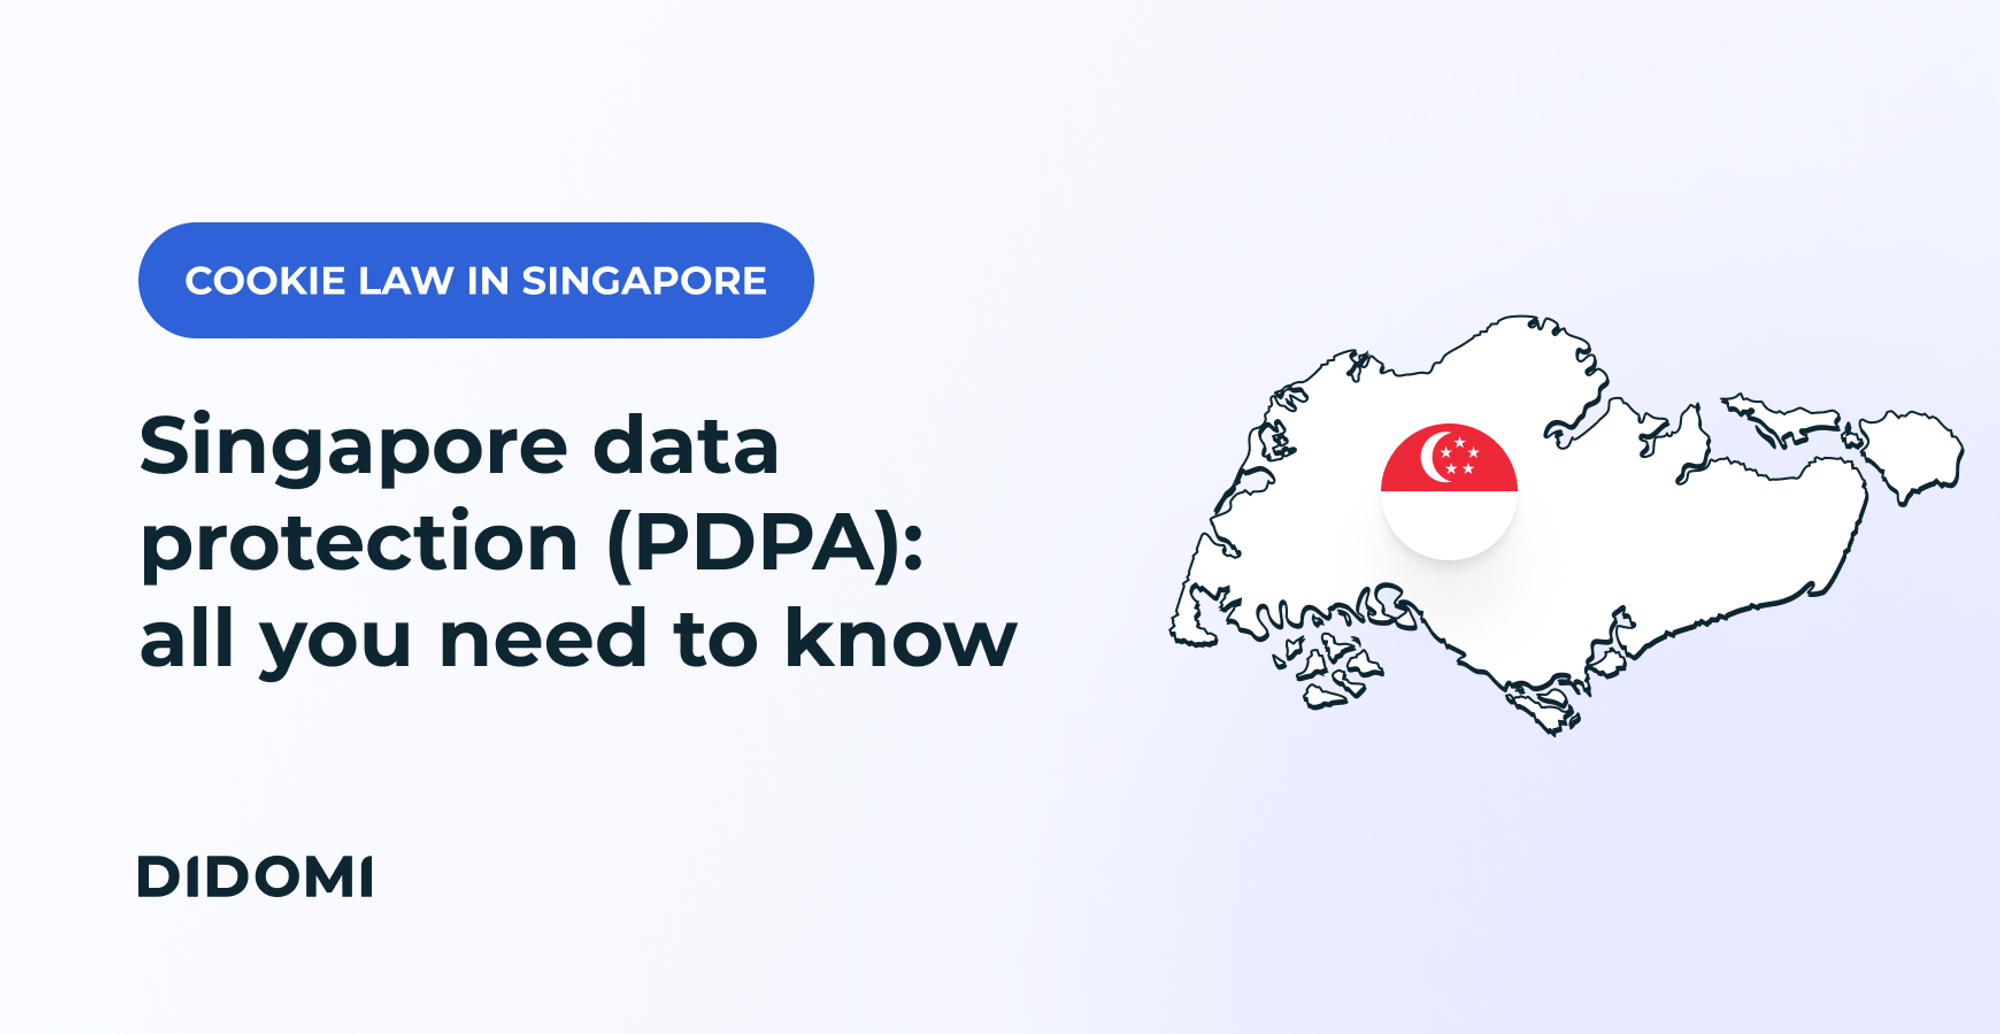 A drawing of the singapore map with the singapore flag over it. A button mentions "cookie law in Singapore" and the title on the image is "Singapore Data Protection  (PDPA): all you need to know"